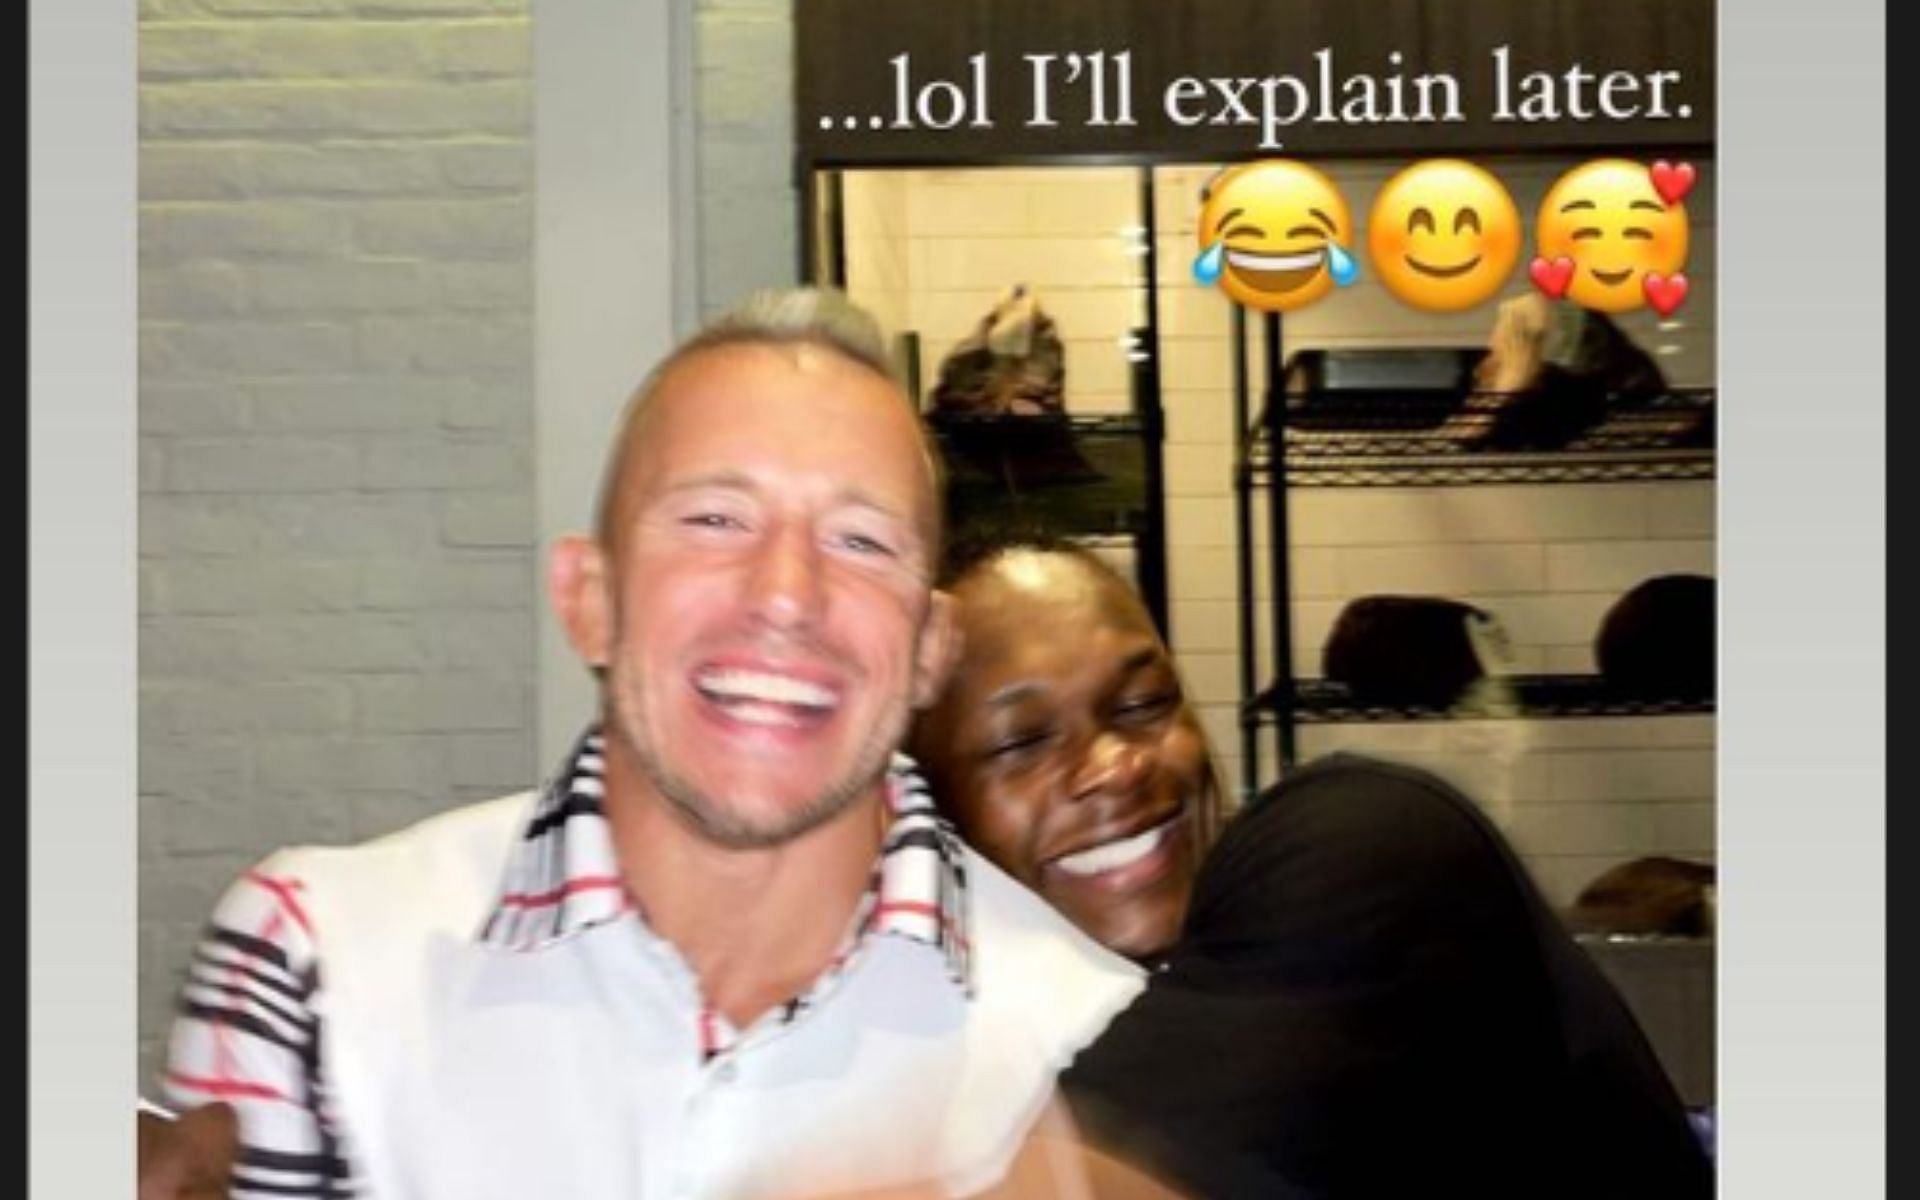 Georges St-Pierre (left) and Israel Adesanya (right) [Image courtesy of @stylebender Instagram]